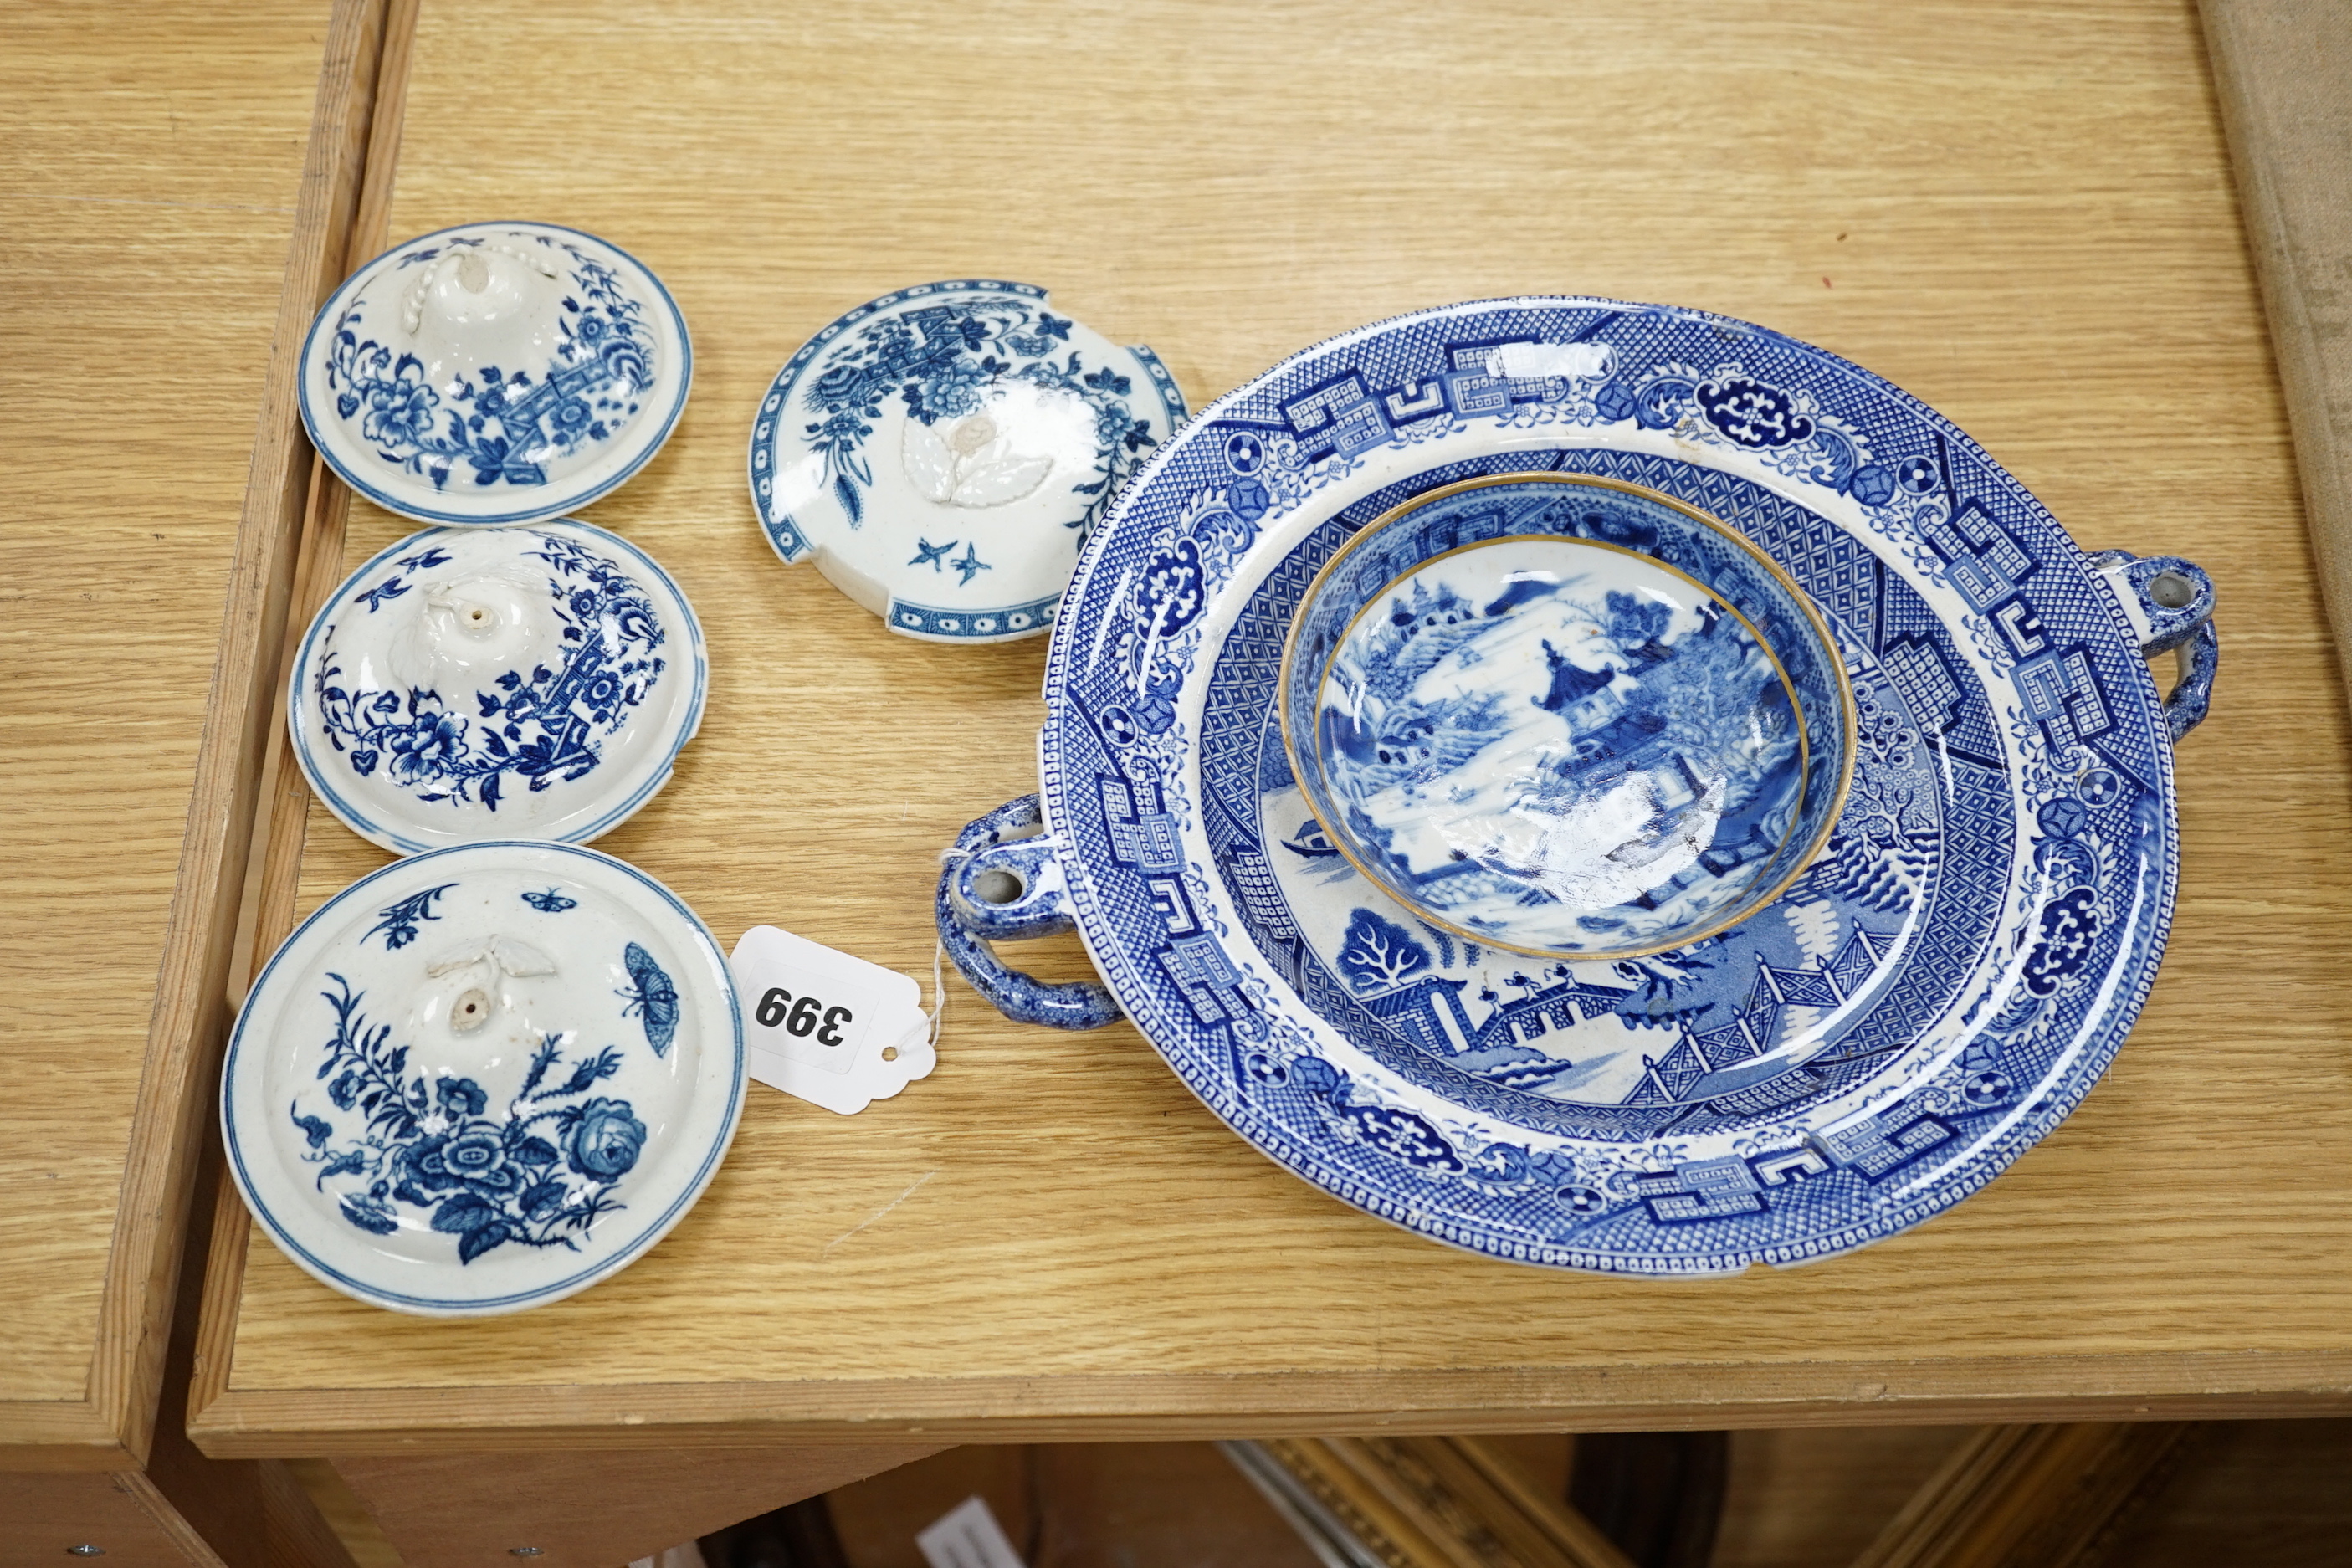 A 19th century Abbotsford pattern blue and white tureen and cover, various dishes and a collection of early Worcester tea and coffee pot covers